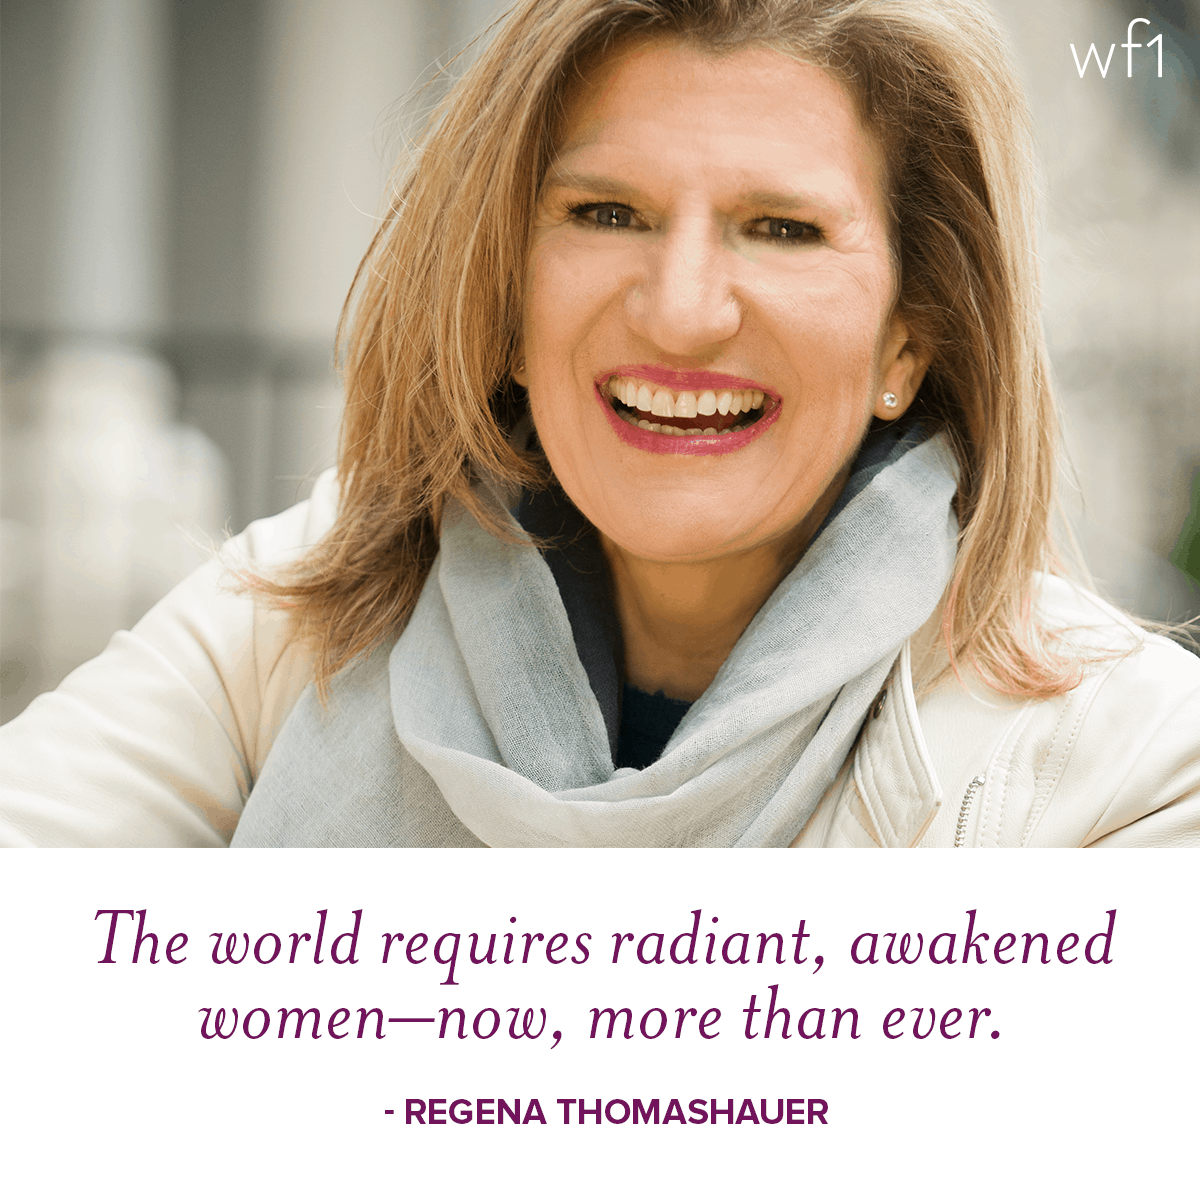 The world requires radiant, awakened women -- now, more than ever - Regena Thomashauer